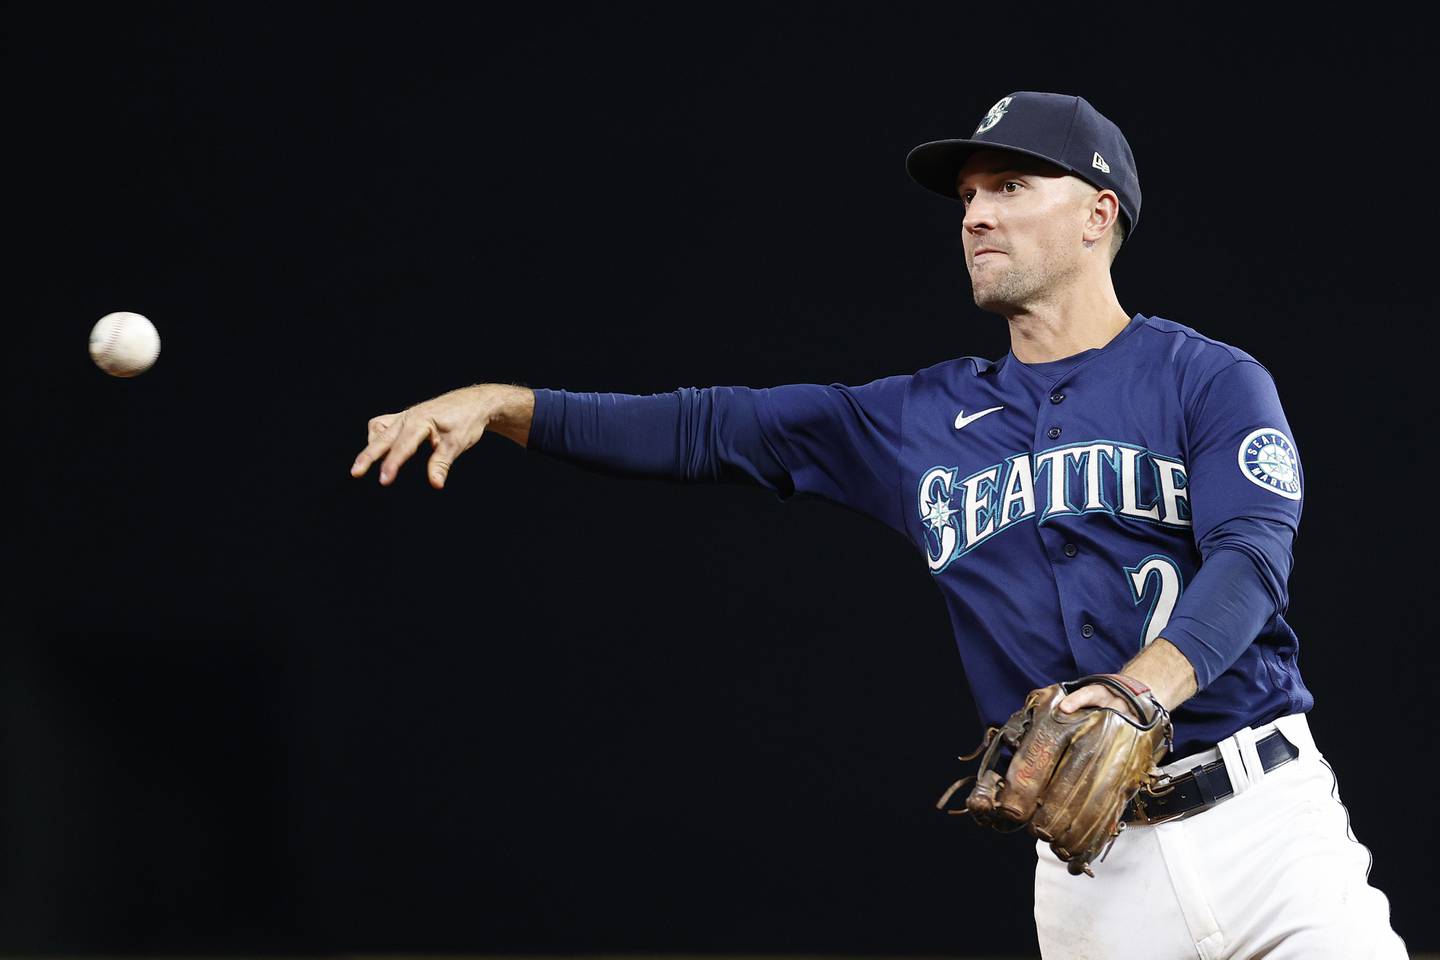 SEATTLE, WASHINGTON - OCTOBER 03: Adam Frazier #26 of the Seattle Mariners throws to first base during the fourth inning against the Detroit Tigers at T-Mobile Park on October 03, 2022 in Seattle, Washington.